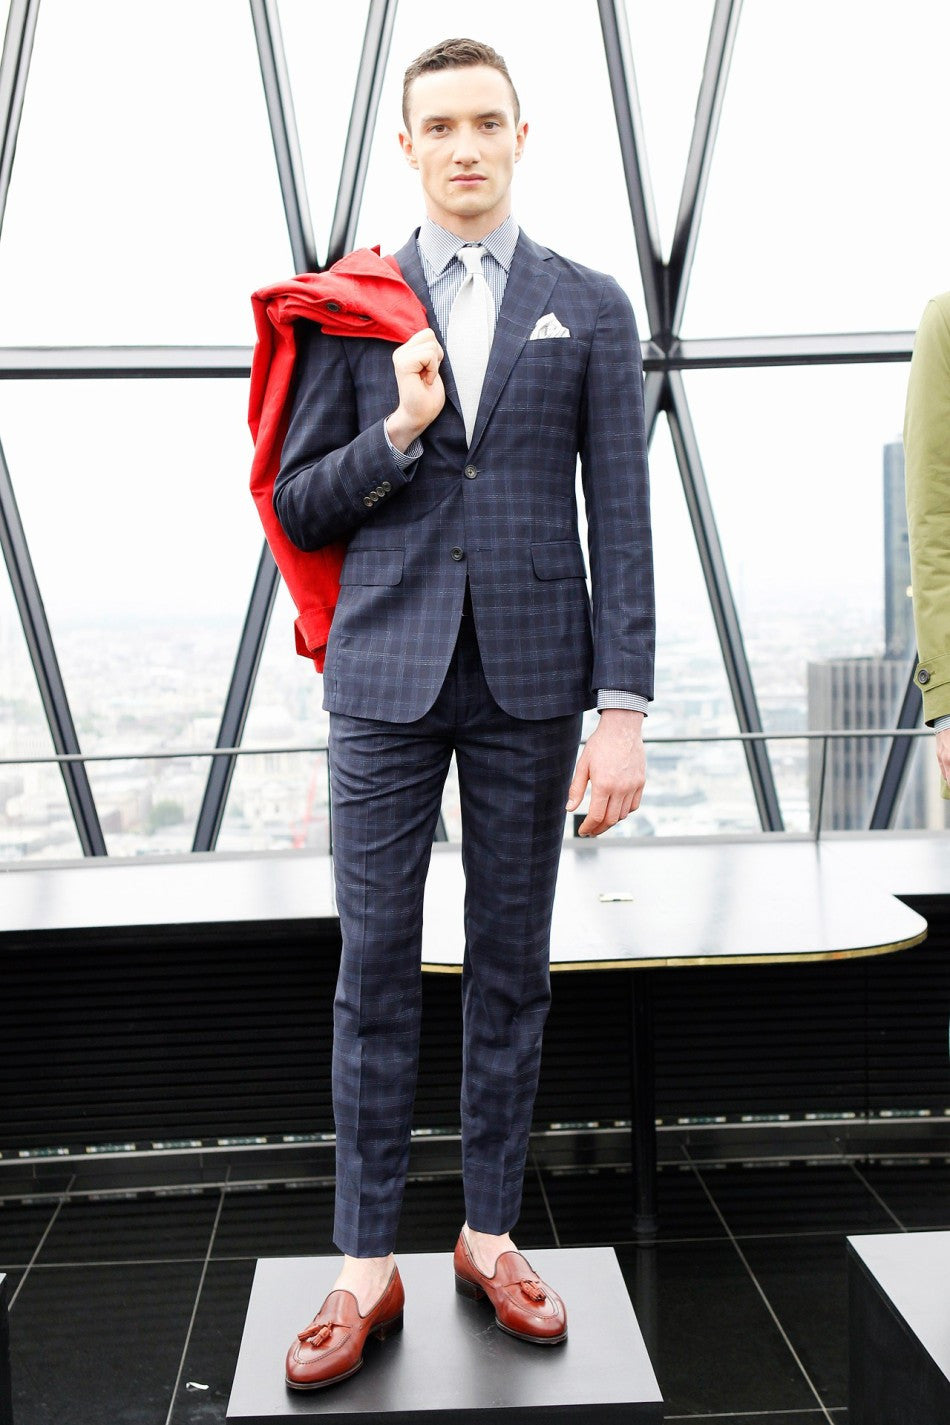 mod-shoes-tassel-loafers-with-a-suit.jpg